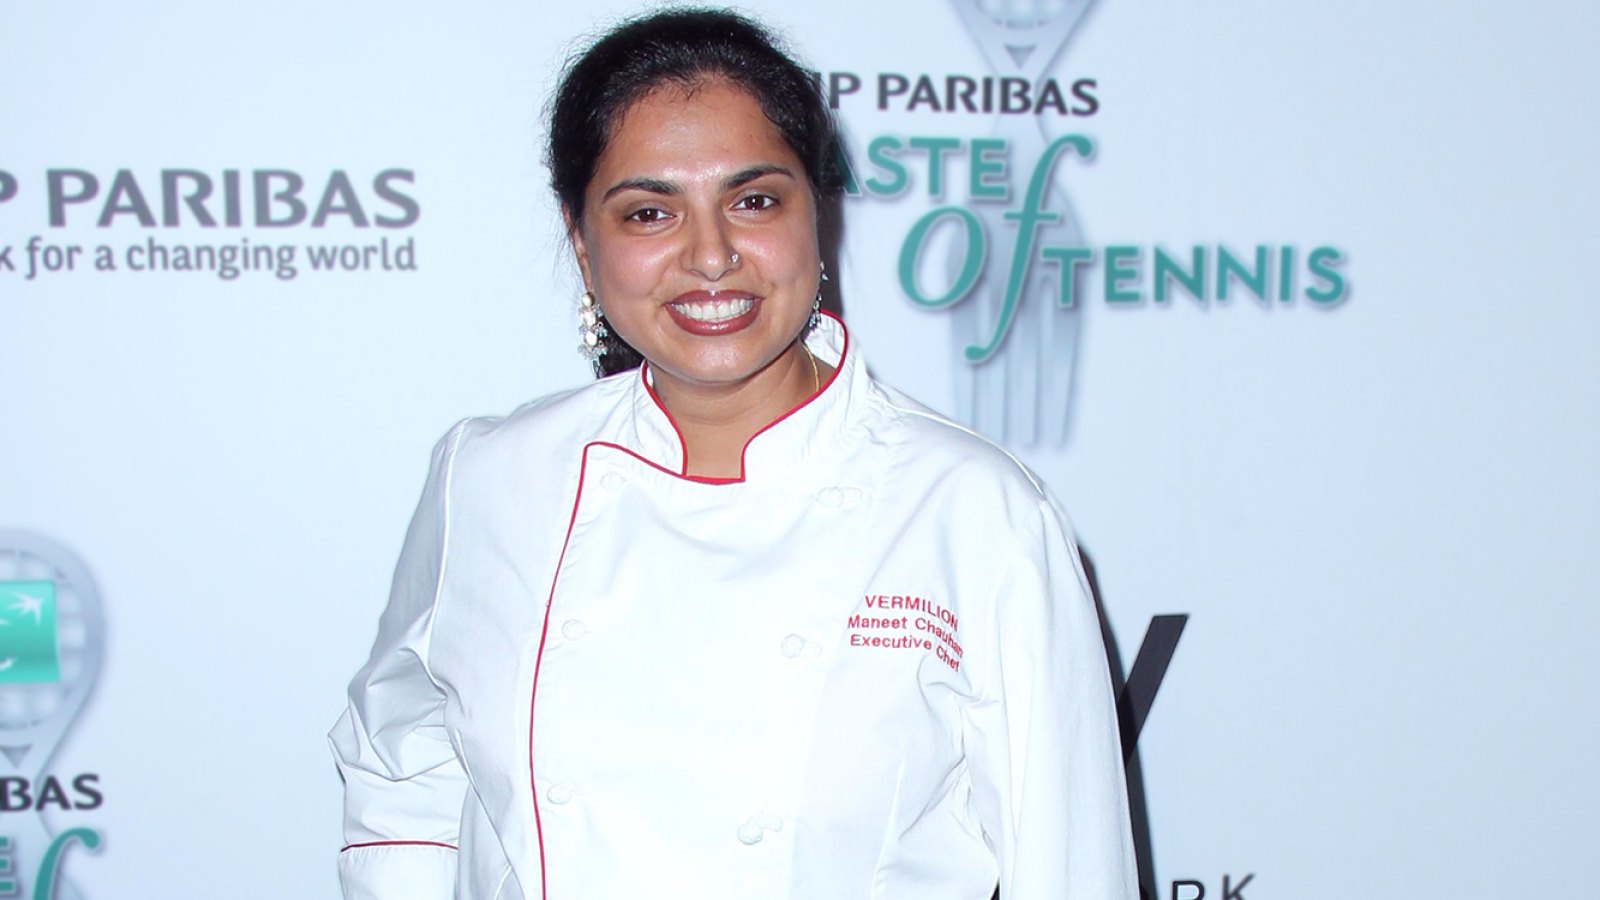 Maneet Chauhan attends 11th Annual BNP PARIBAS TASTE OF TENNIS at W New York on August 26, 2010.